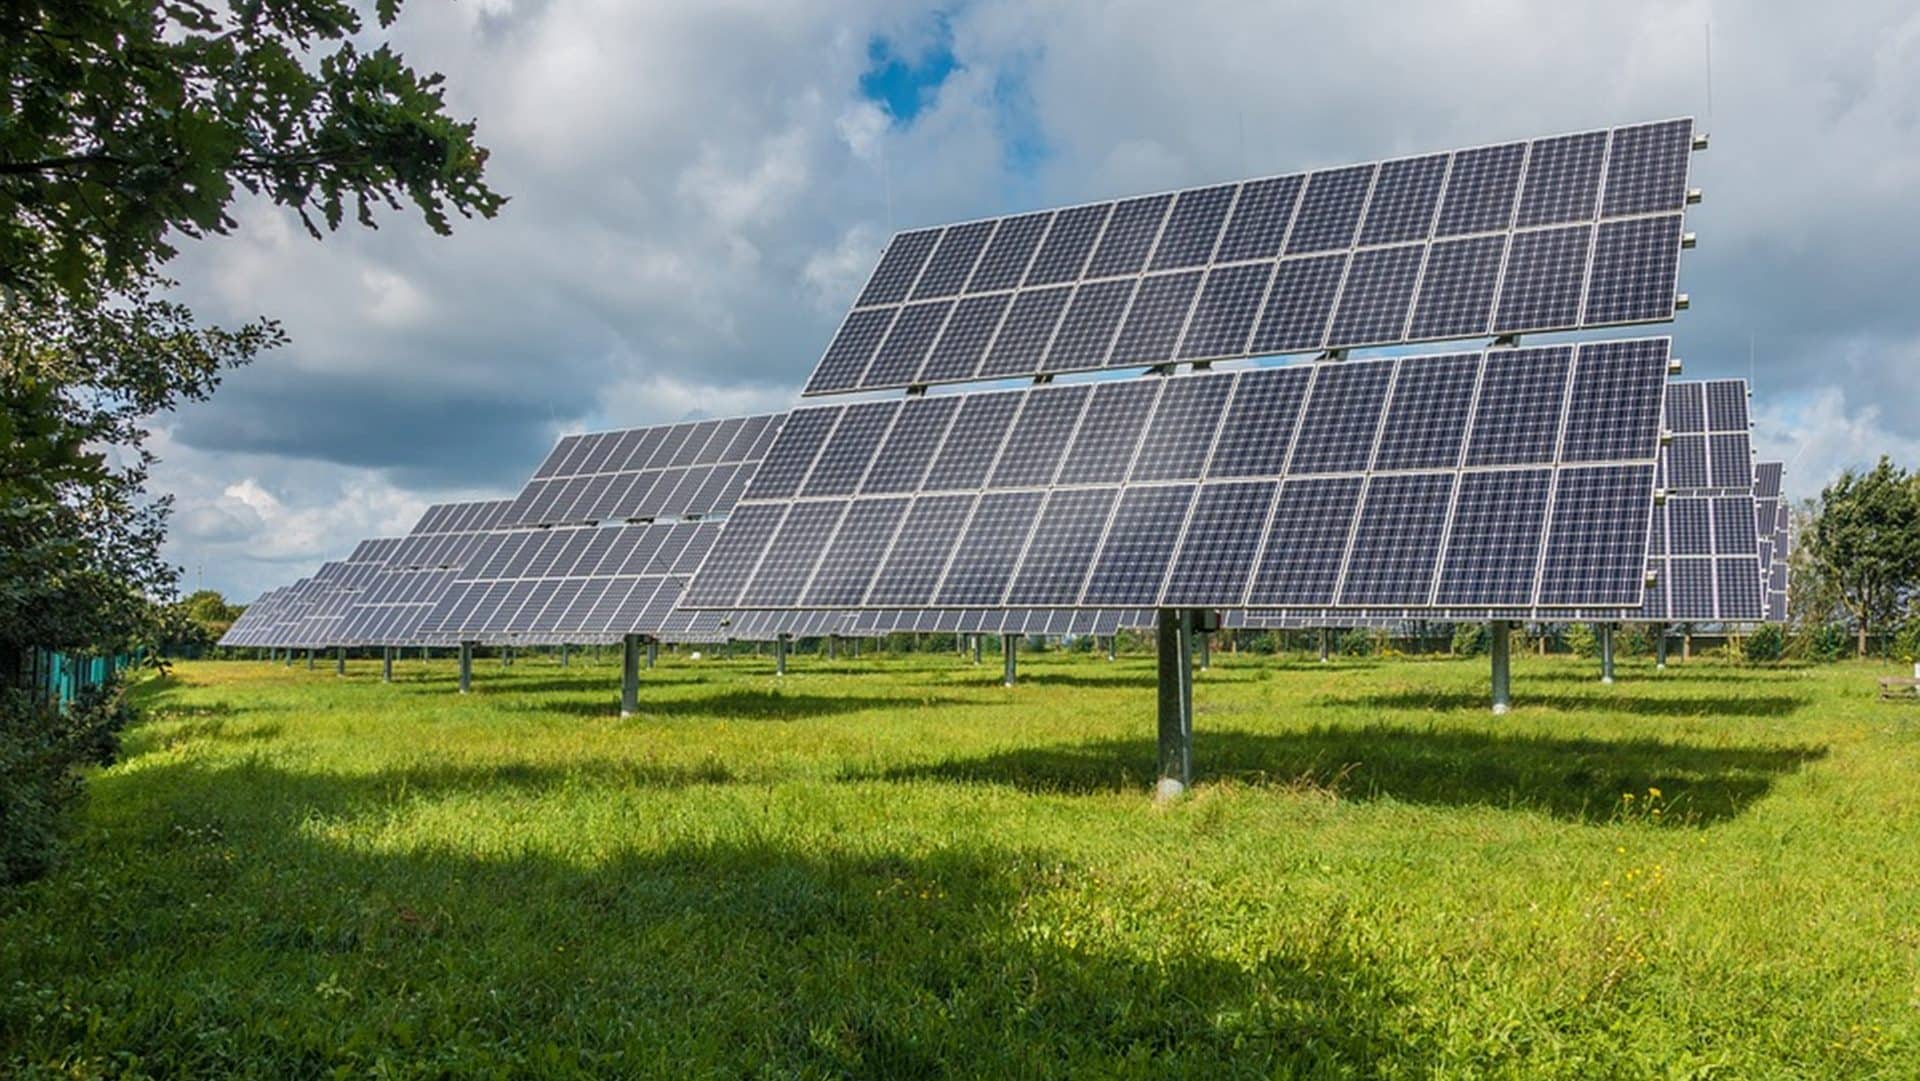 Adani Green inks pact with Essel Green to acquire 40 MW solar plant